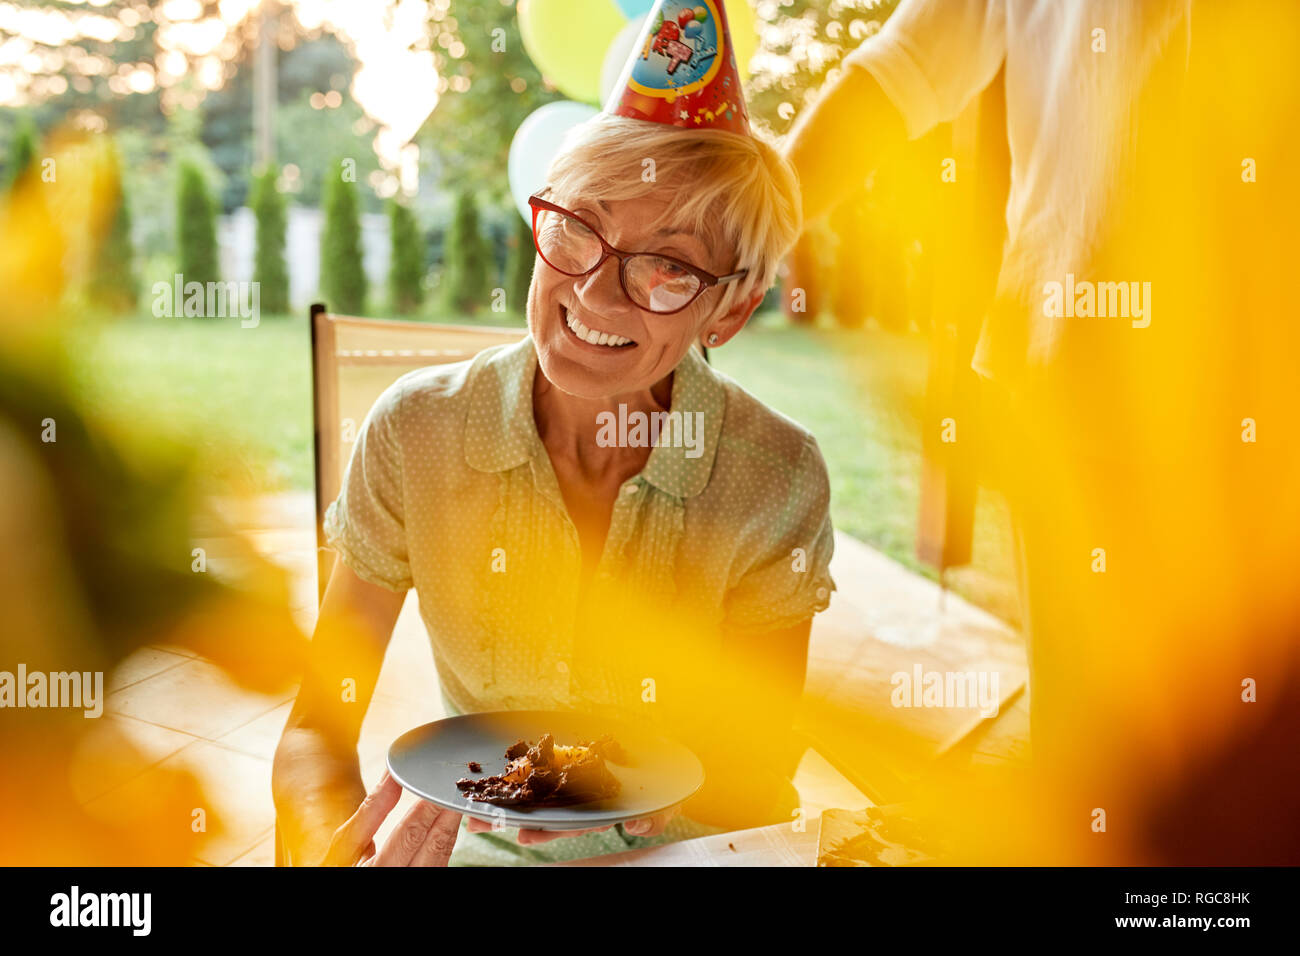 Smiling mature woman holding plate with cake on a birthday garden party Stock Photo